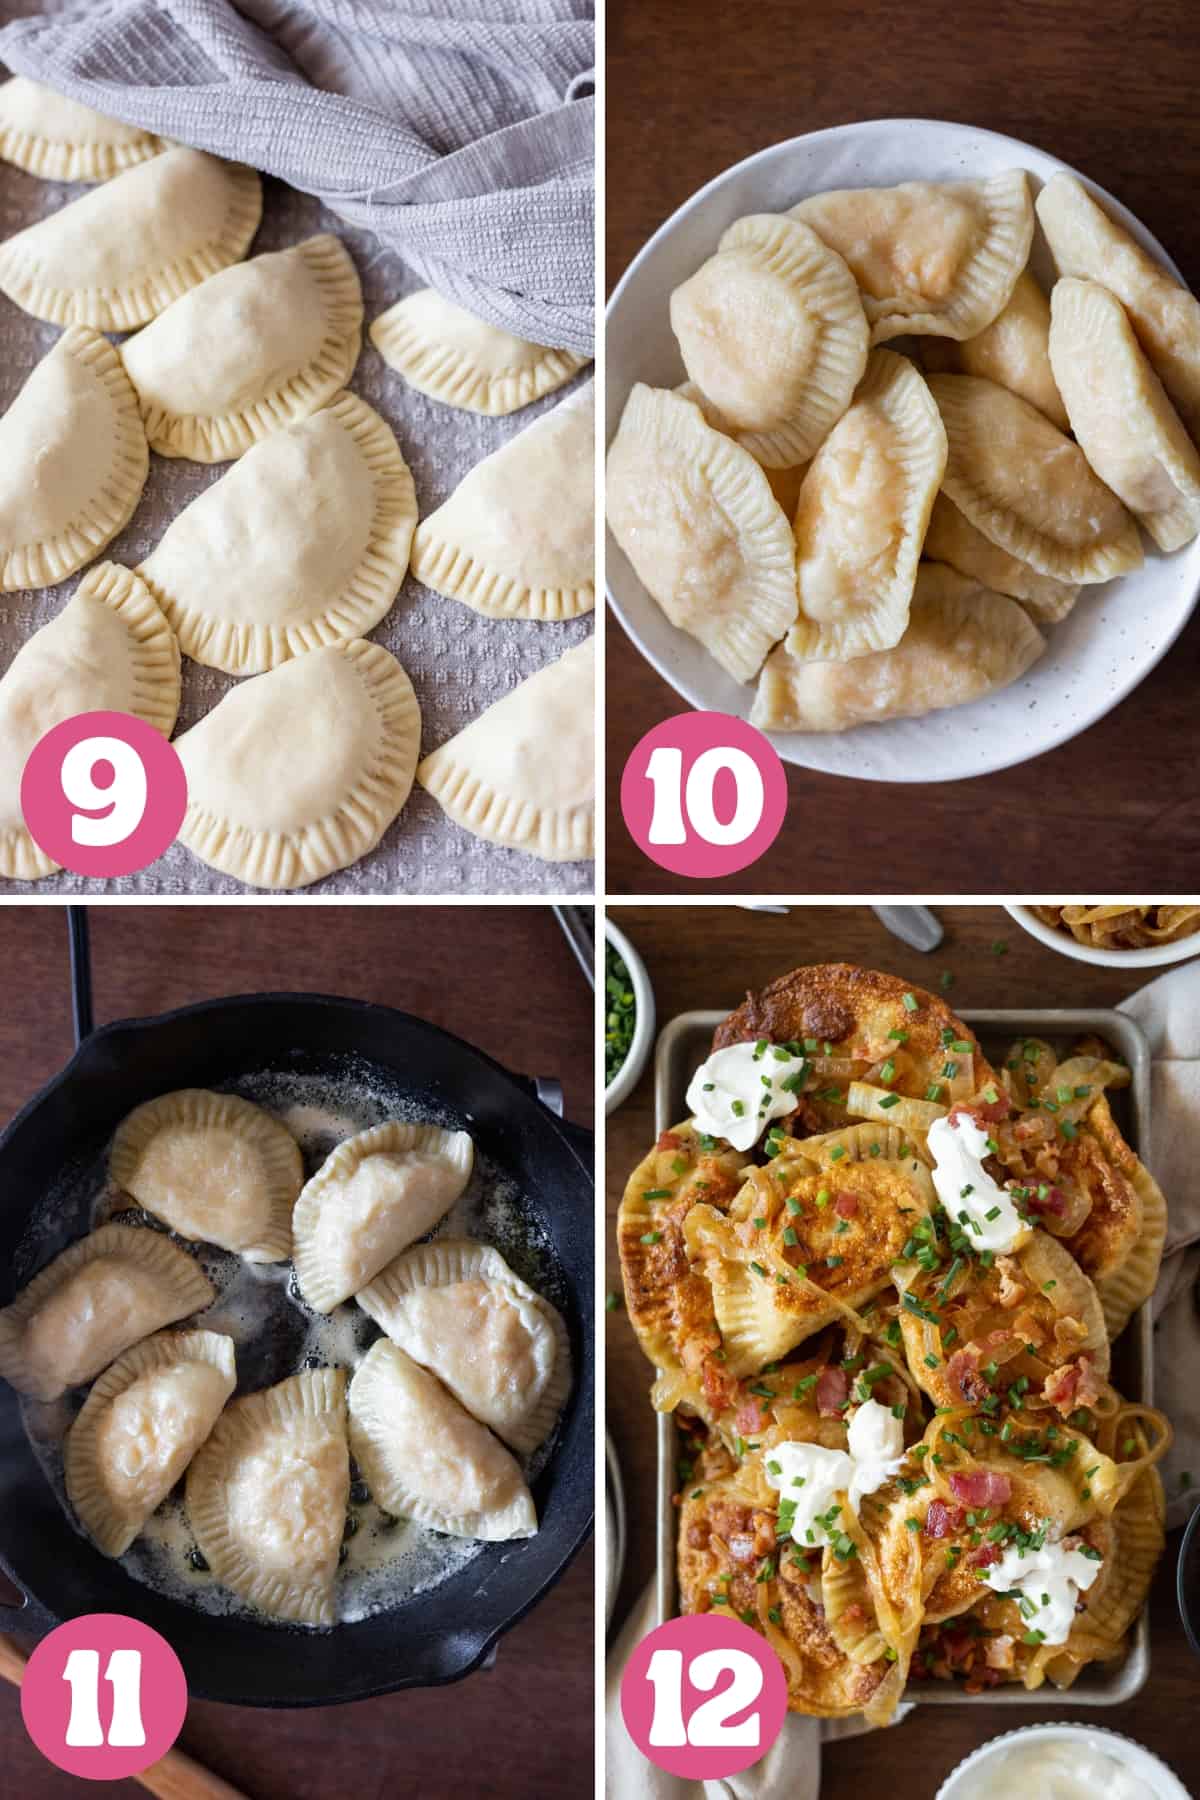 Showing how to make loaded pierogi in steps 9 through 12